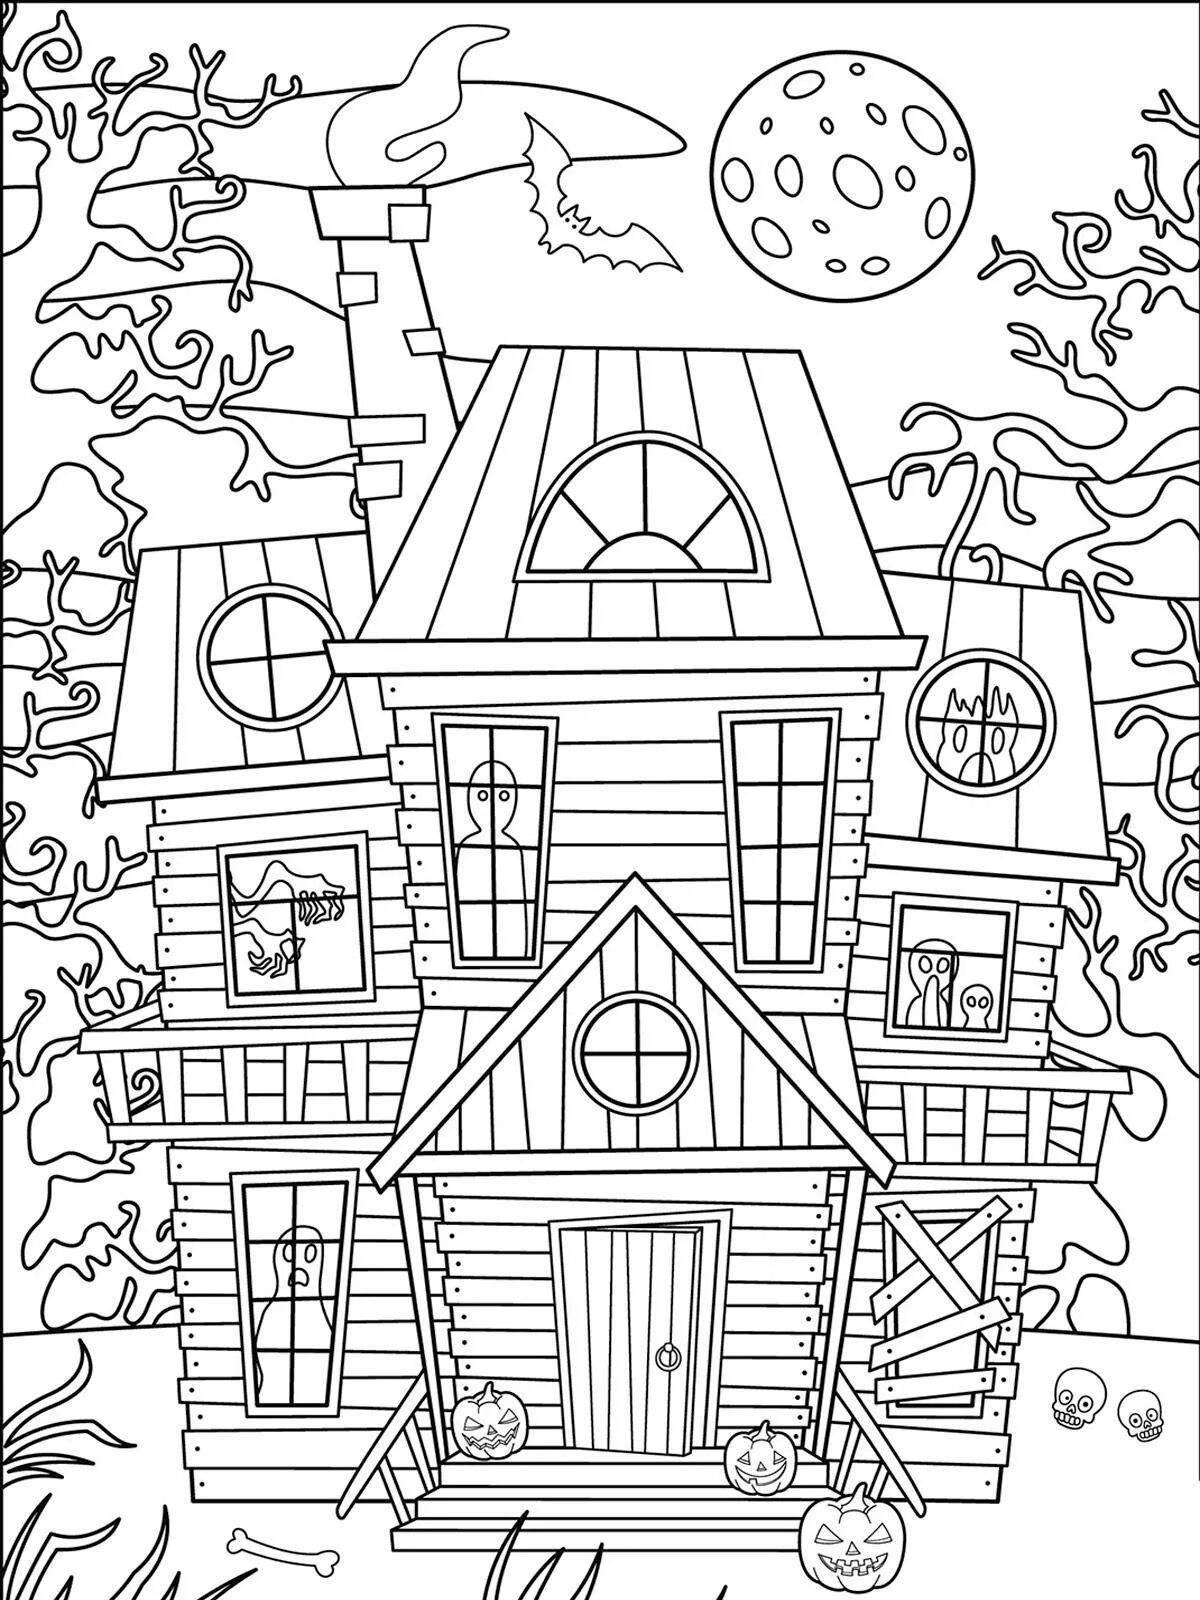 Colouring chilling sinister house